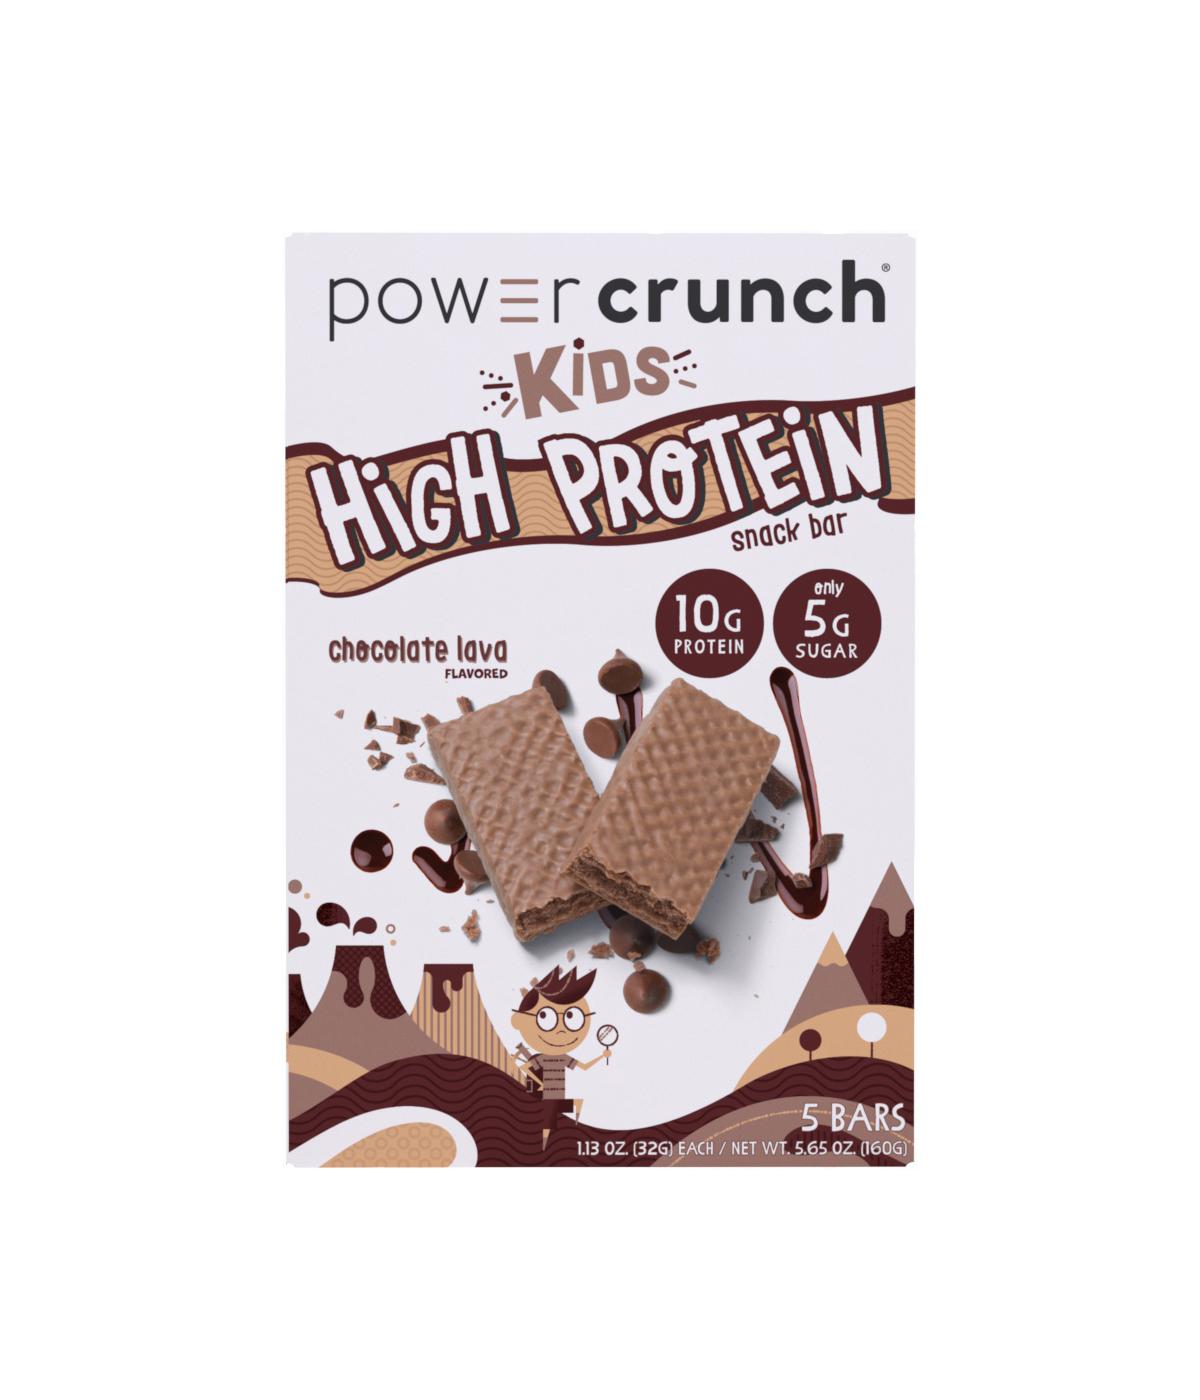 Power Crunch 10g Protein Bar - Kids Chocolate Lava; image 1 of 3